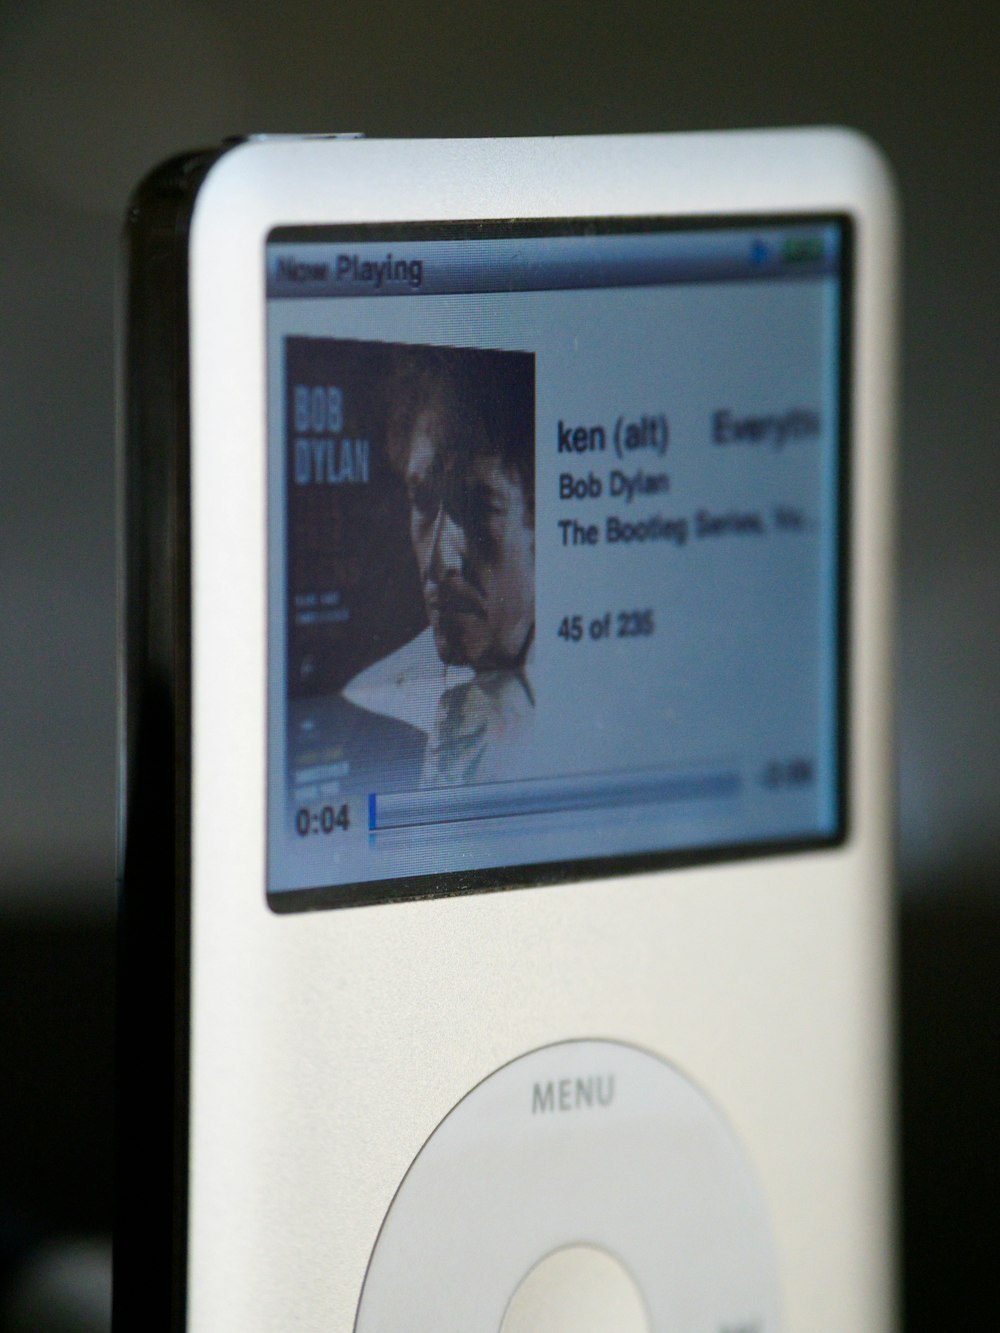 white ipod classic showing man in black jacket